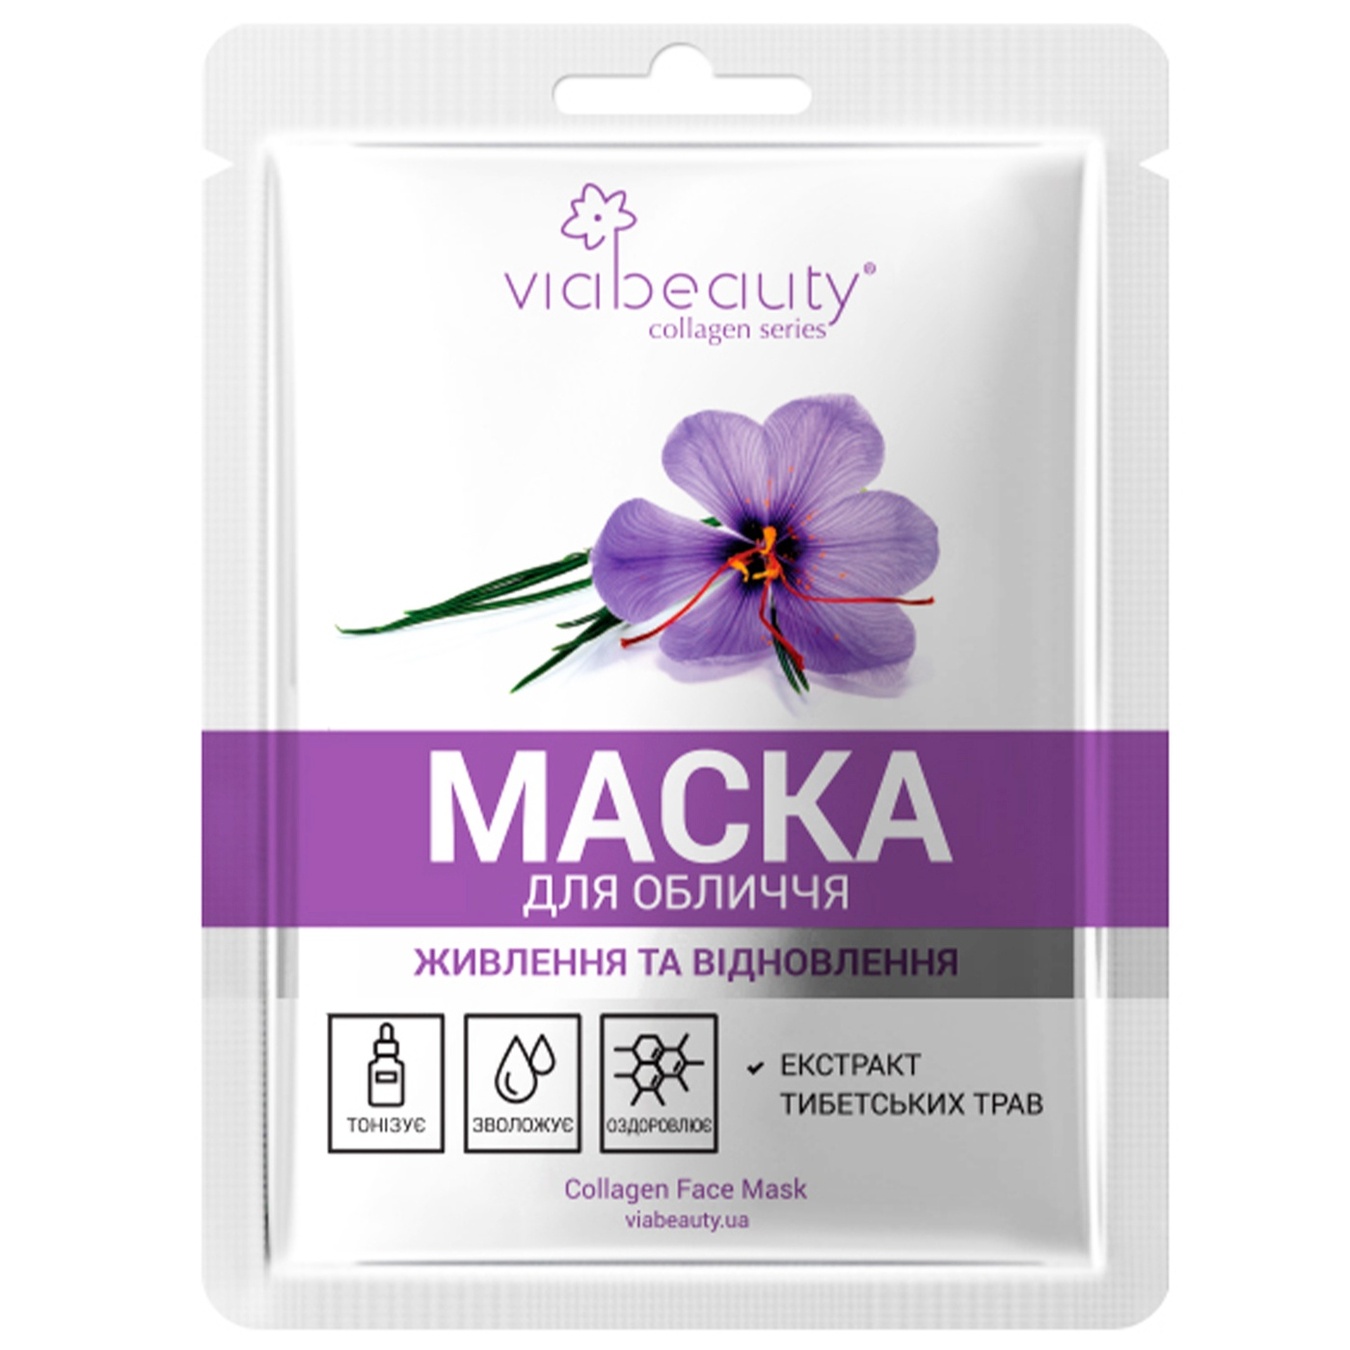 VIABEAUTY fabric face mask with an extract of Tibetan herbs and a multivitamin complex for nutrition and recovery